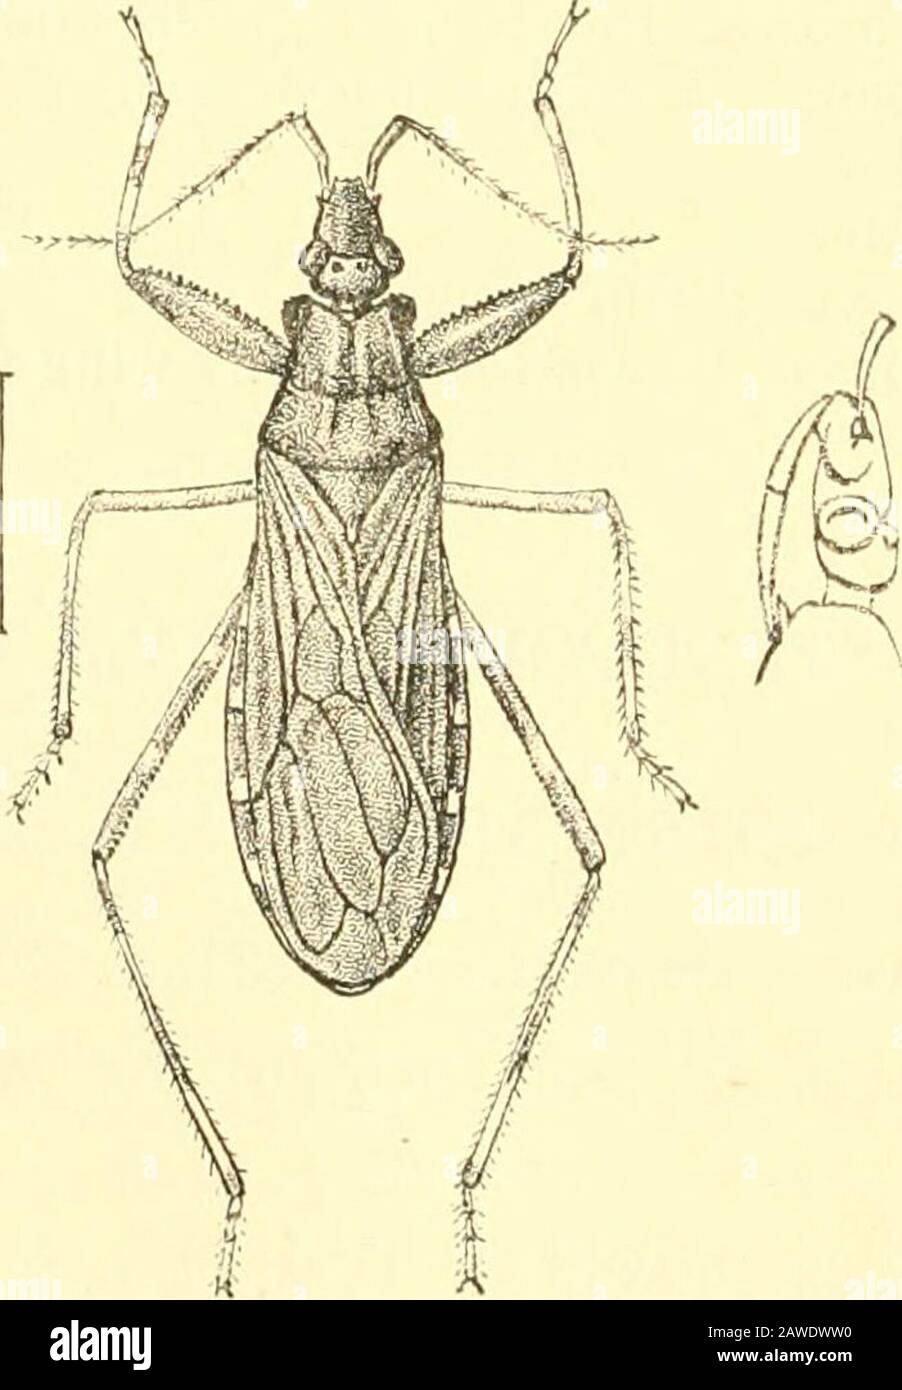 Rhynchota .. . p. 4 (1906). Type, A. aciitam/ula, Stal, from the Philippines.Distribution. India and the Malay Archipelago. Aiilacogenia corniculata, Stdl, Ofc. Vet.-Ak. Fdrh. 1870, p. 701JSredd. Ann. Soc. Ent. Belg. 1909, p. 80o. Diaditus errabuudus, Dist. (Vol. II, p. 226, f. 160.) Allomastix errabundus, Bergr. Wien. Ent. Zeit. xxv, p. 4 (1906). In describing and generically locating this species, I relied onthe character given by Stal in his generic diagnosis tihiis com-pressis, and had not then noticed that in a second species he haddescribed the tibiae as ant/ustce. Breddin states tliat h Stock Photo